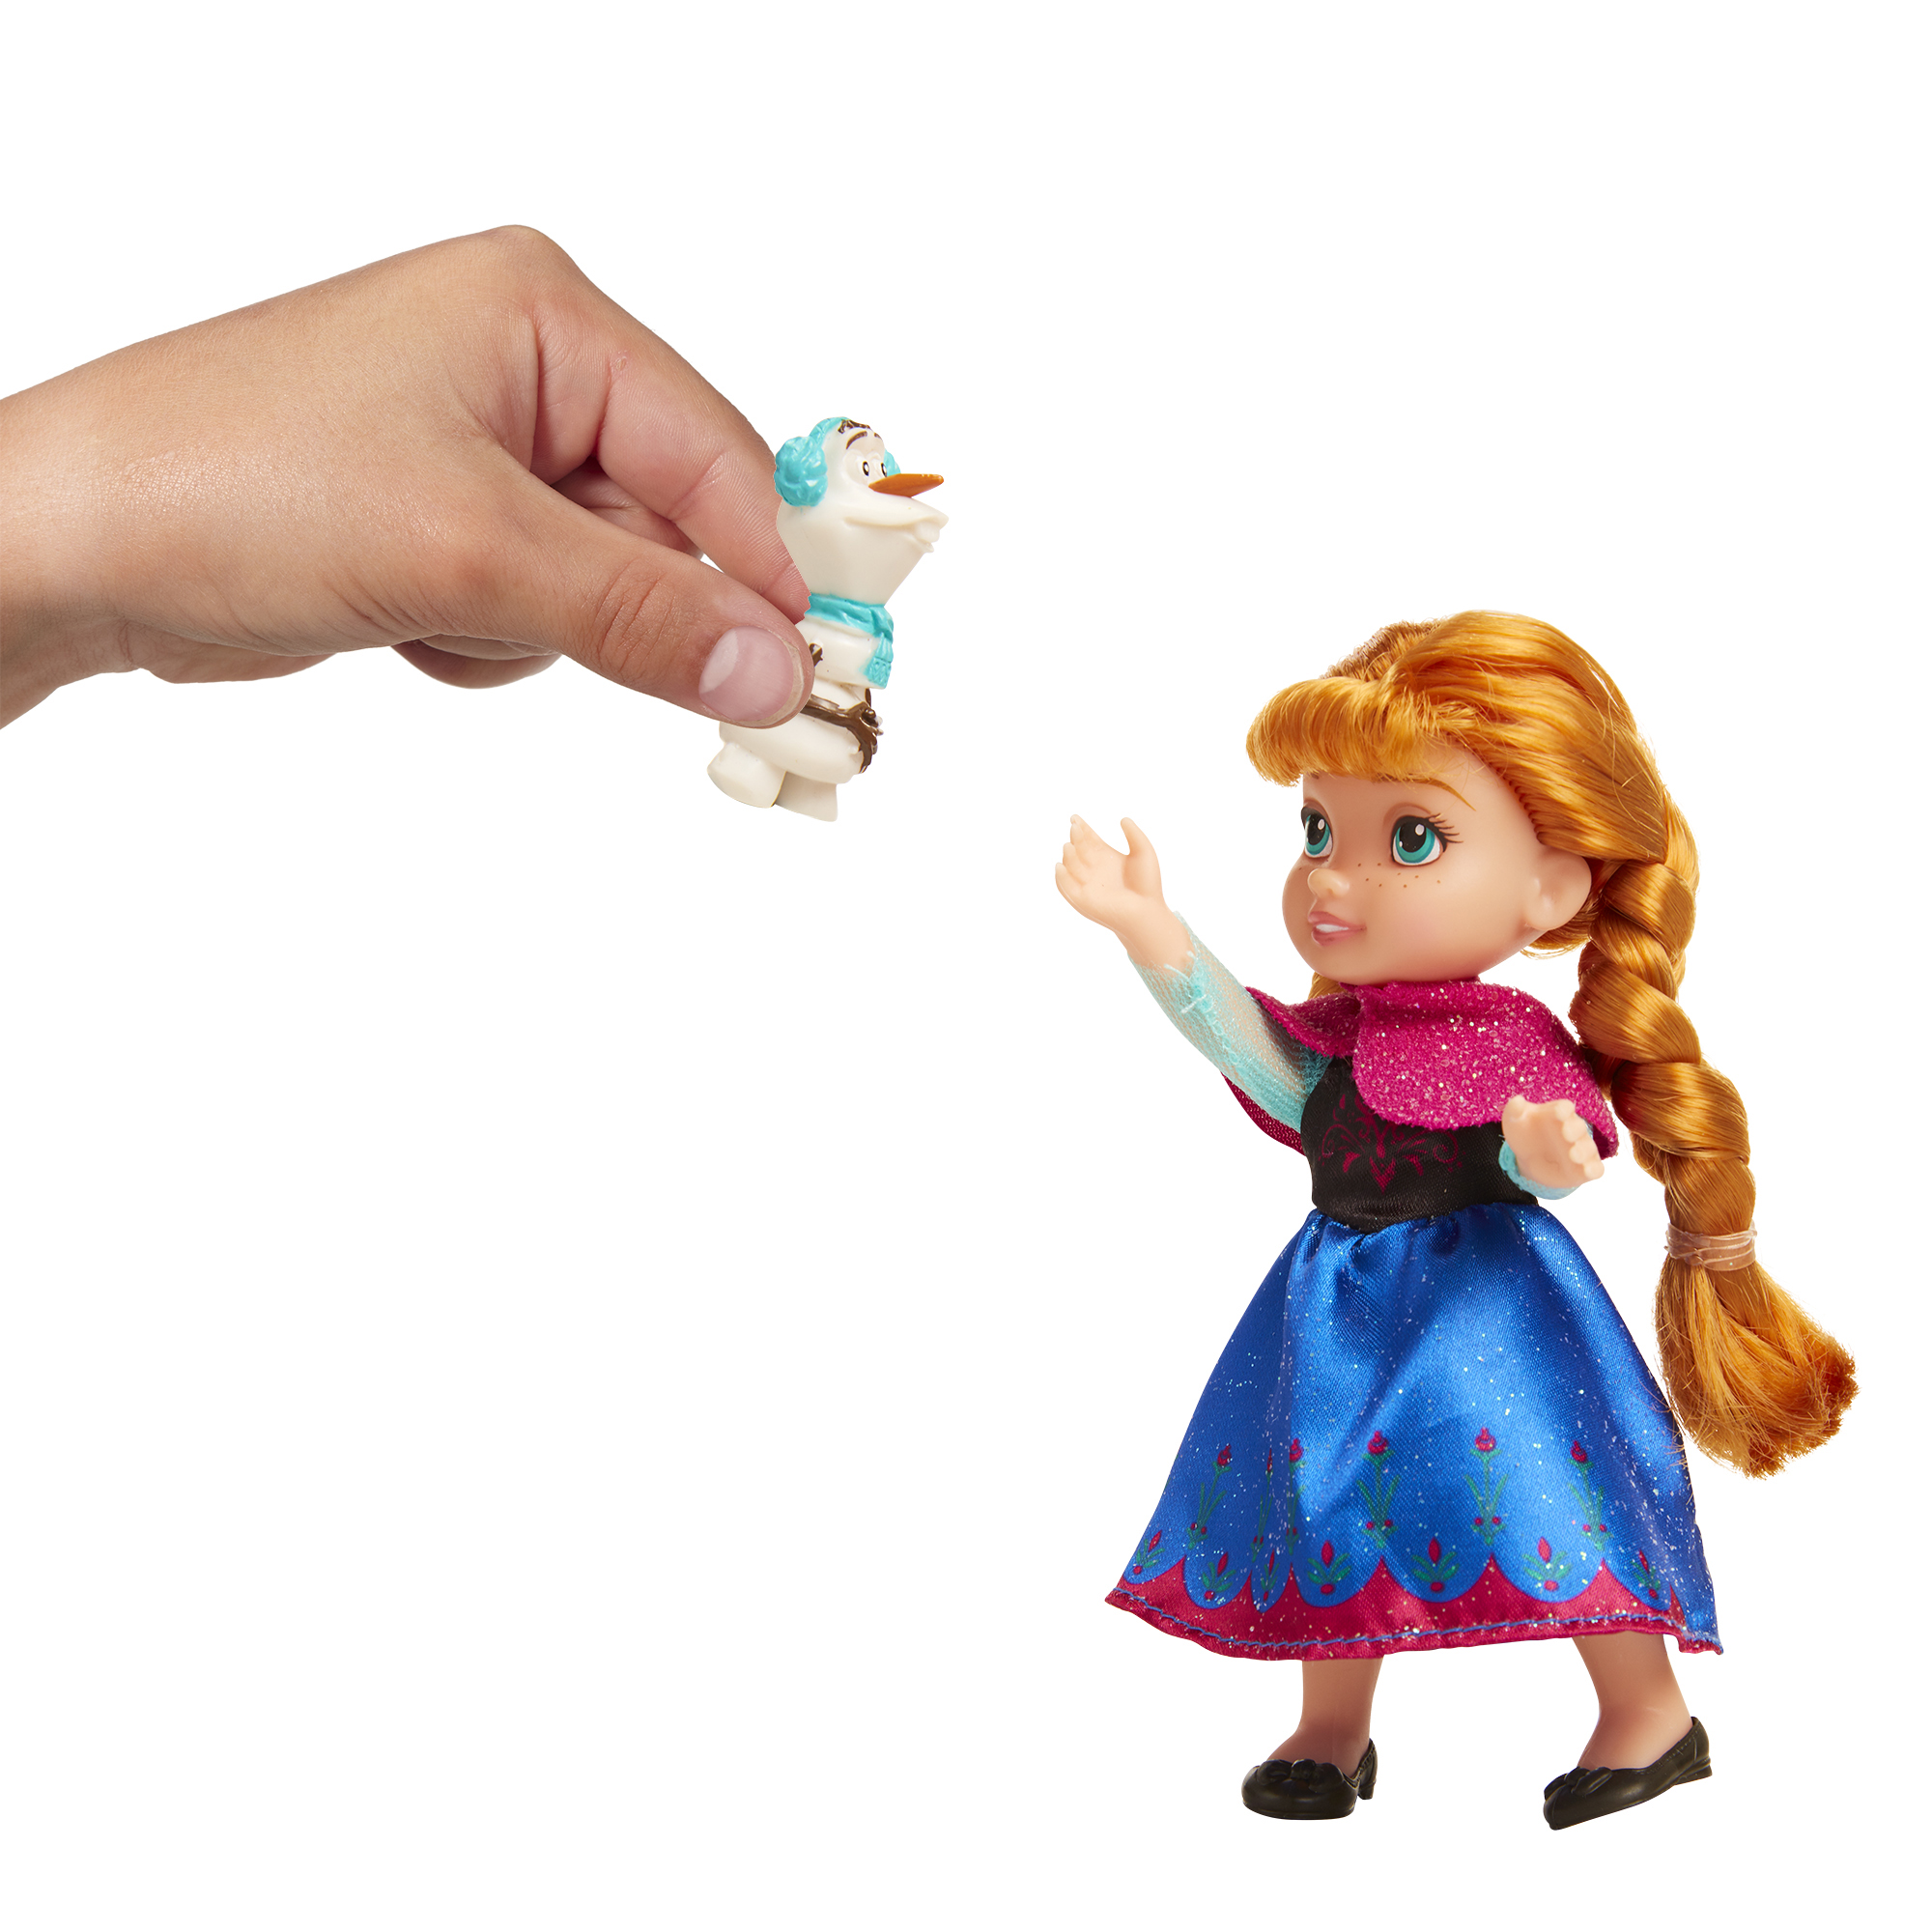 Disney Frozen Petite Anna Doll with Olaf - image 2 of 6